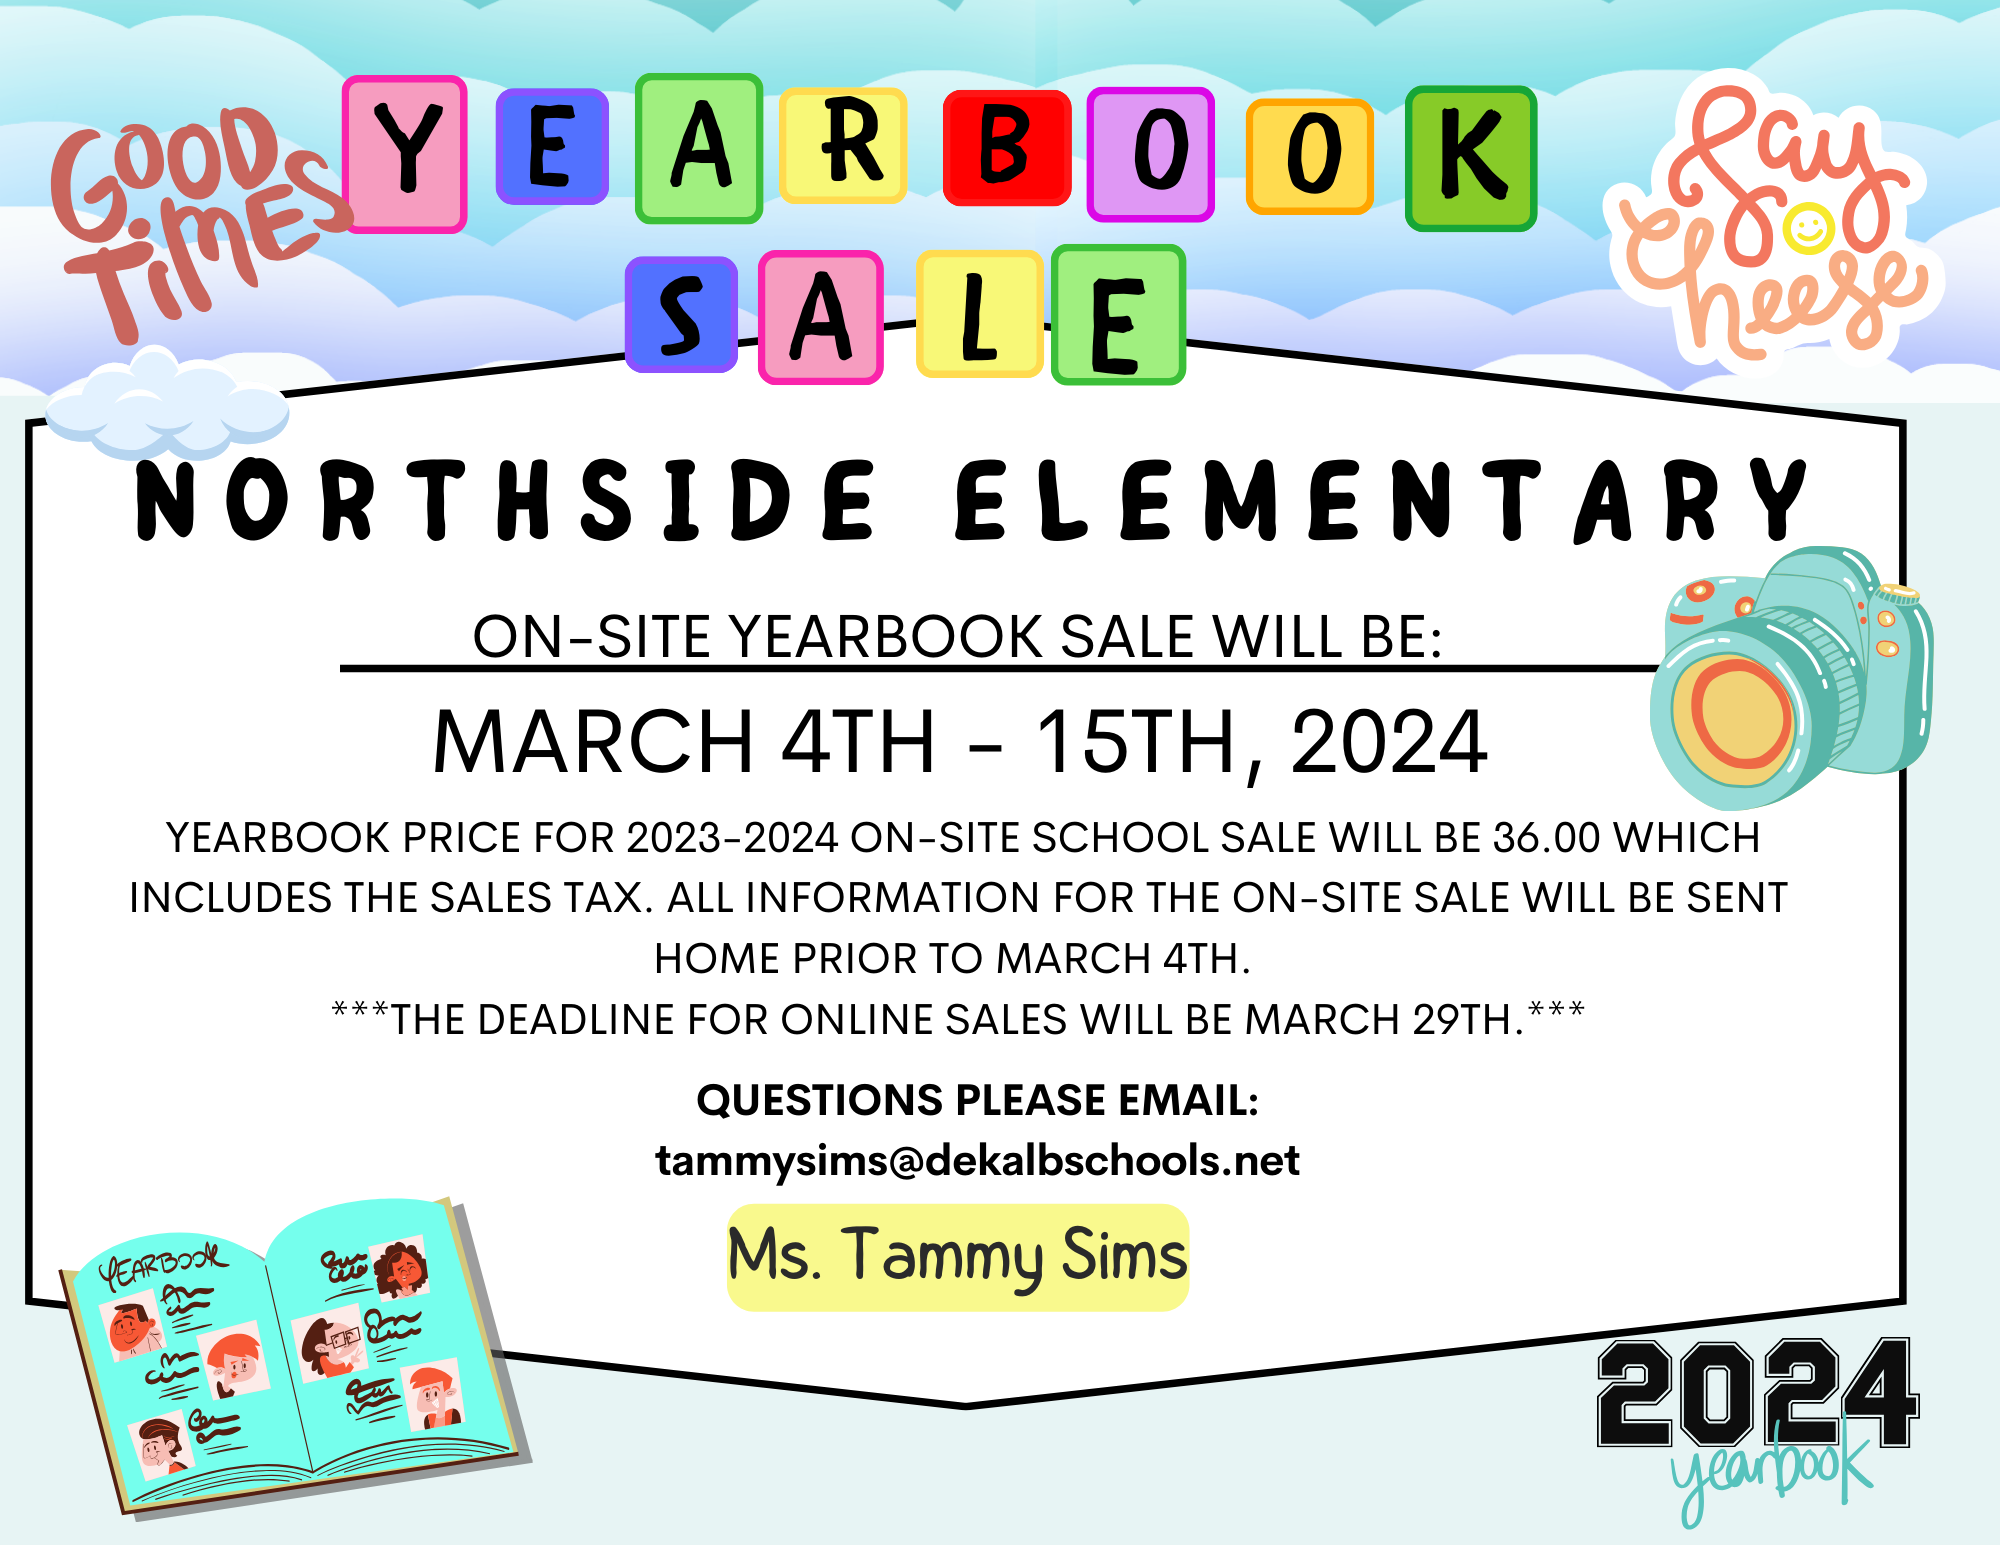 YEARBOOK SALE ON-SITE MARCH 4 - 15, 24....PRICE IS 35.00 WHICH INCLUDES TAX